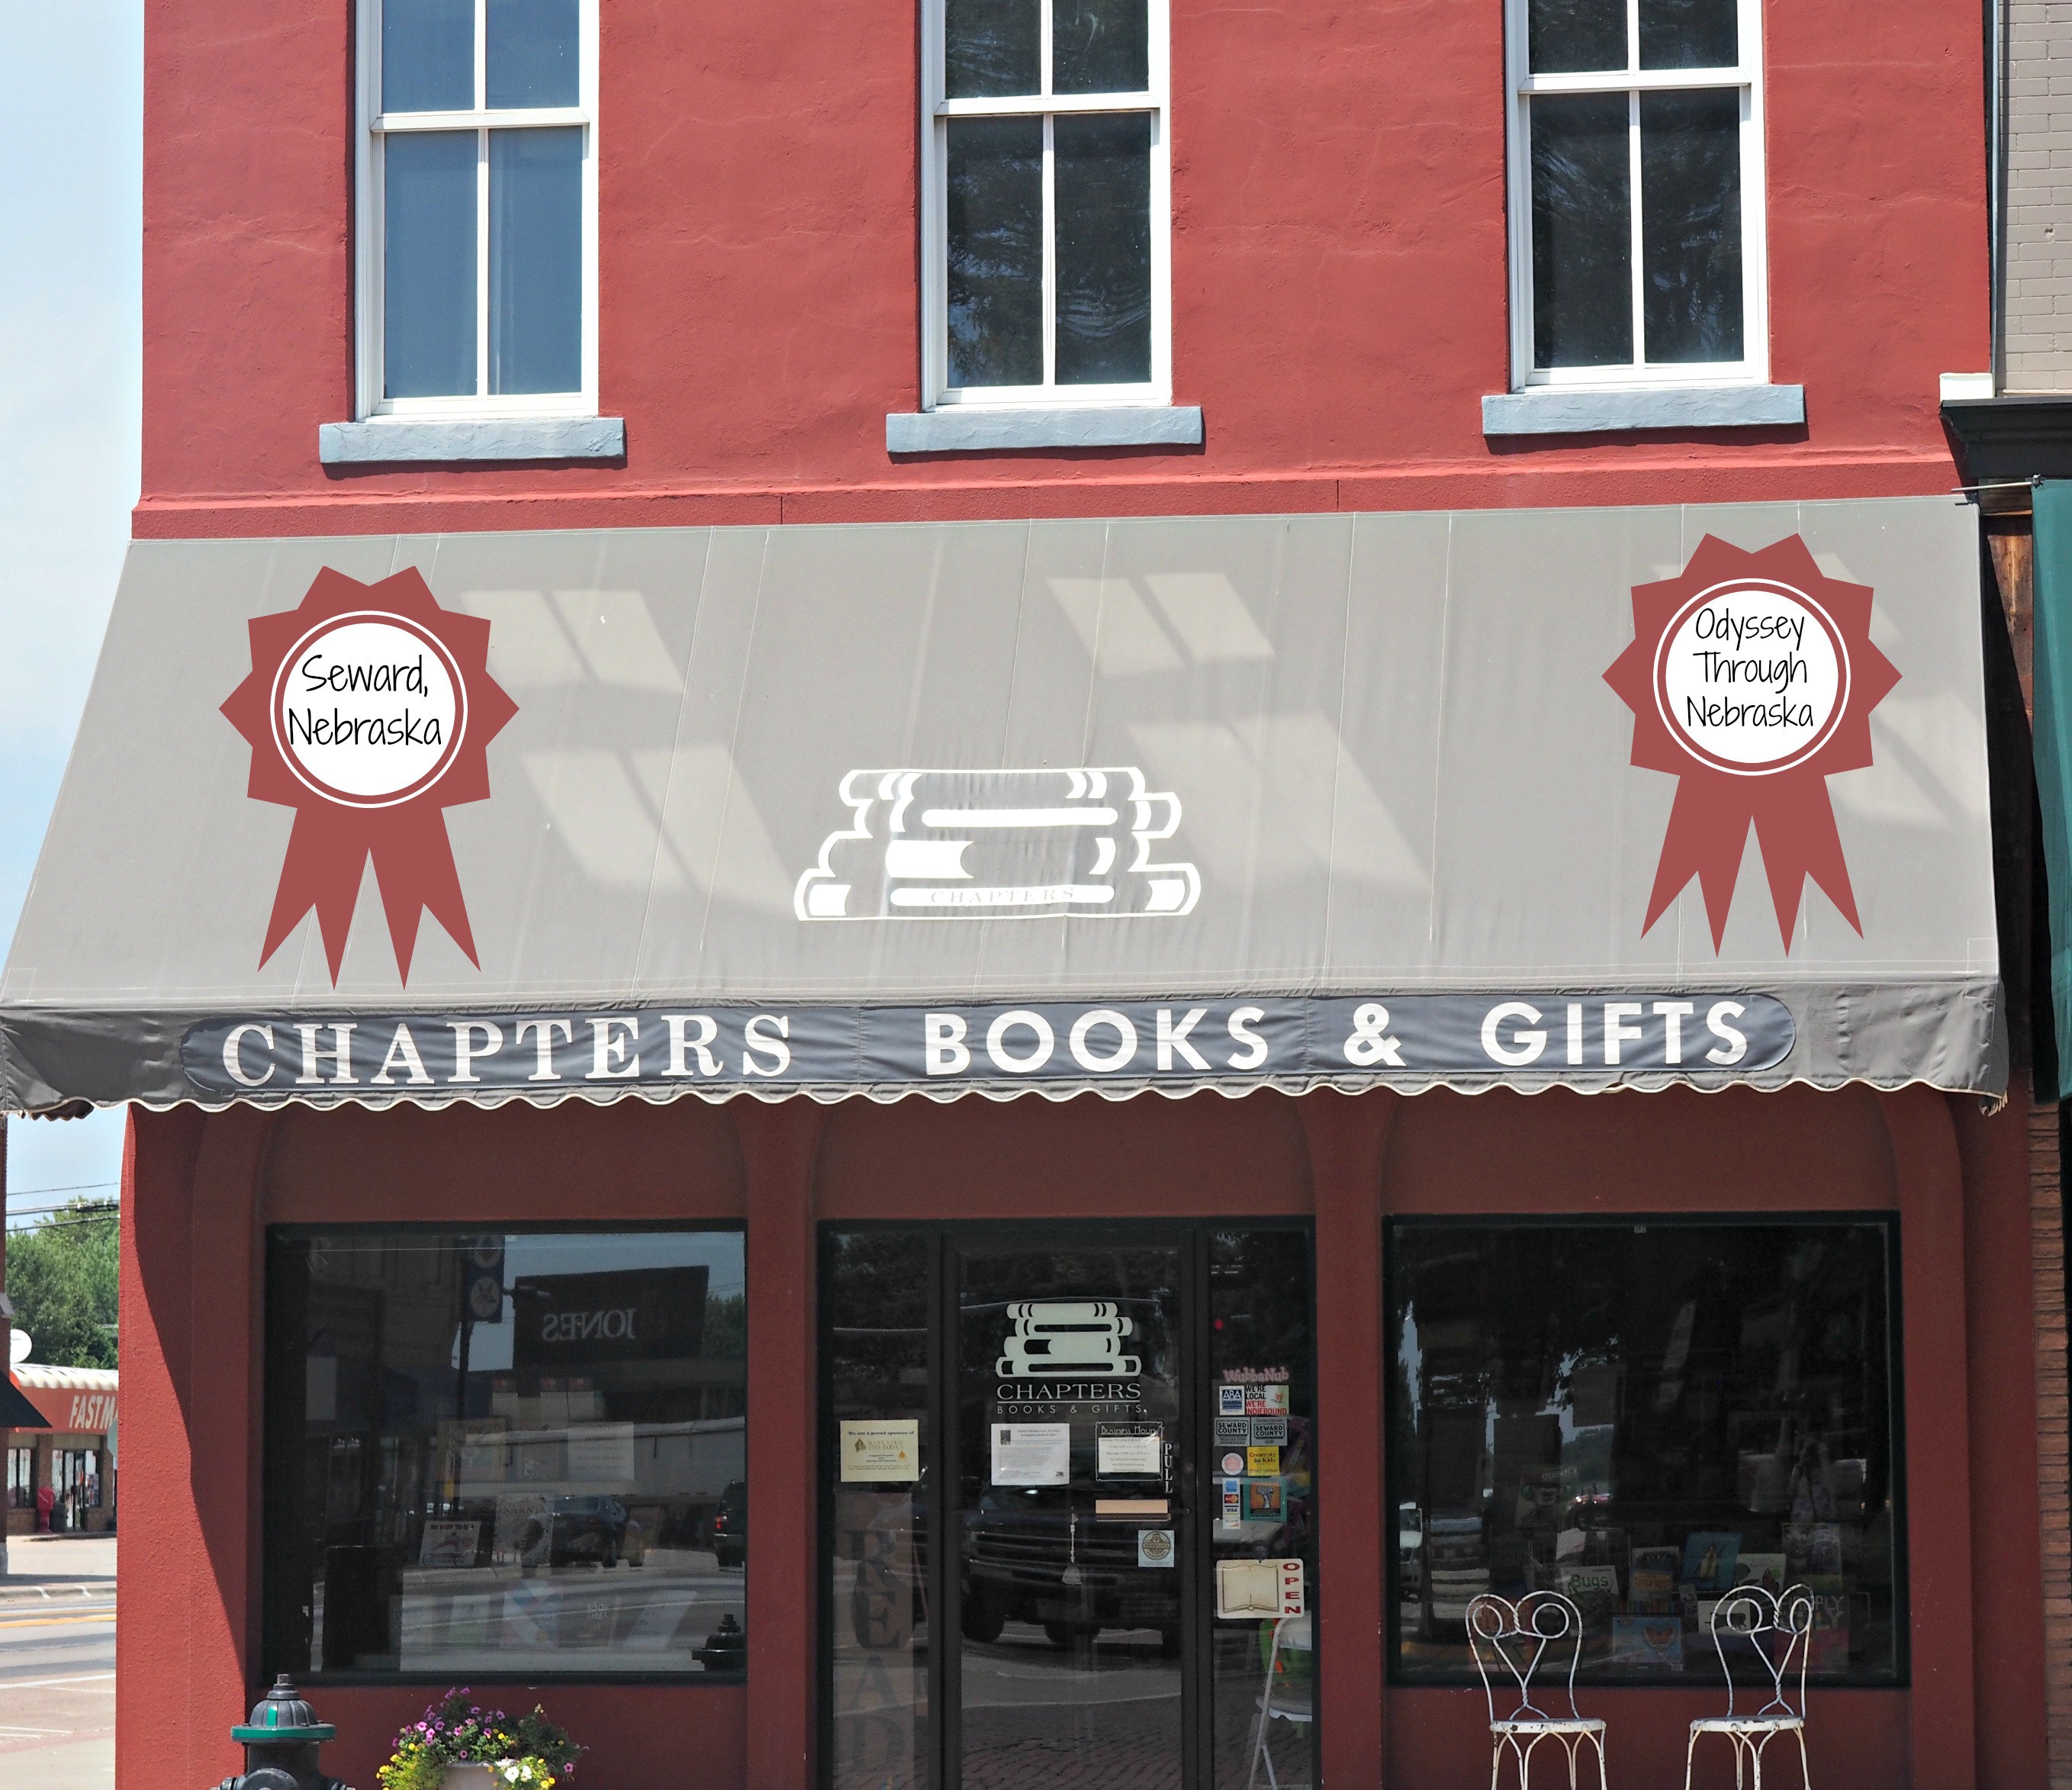 Chapters Books & Gifts in Seward